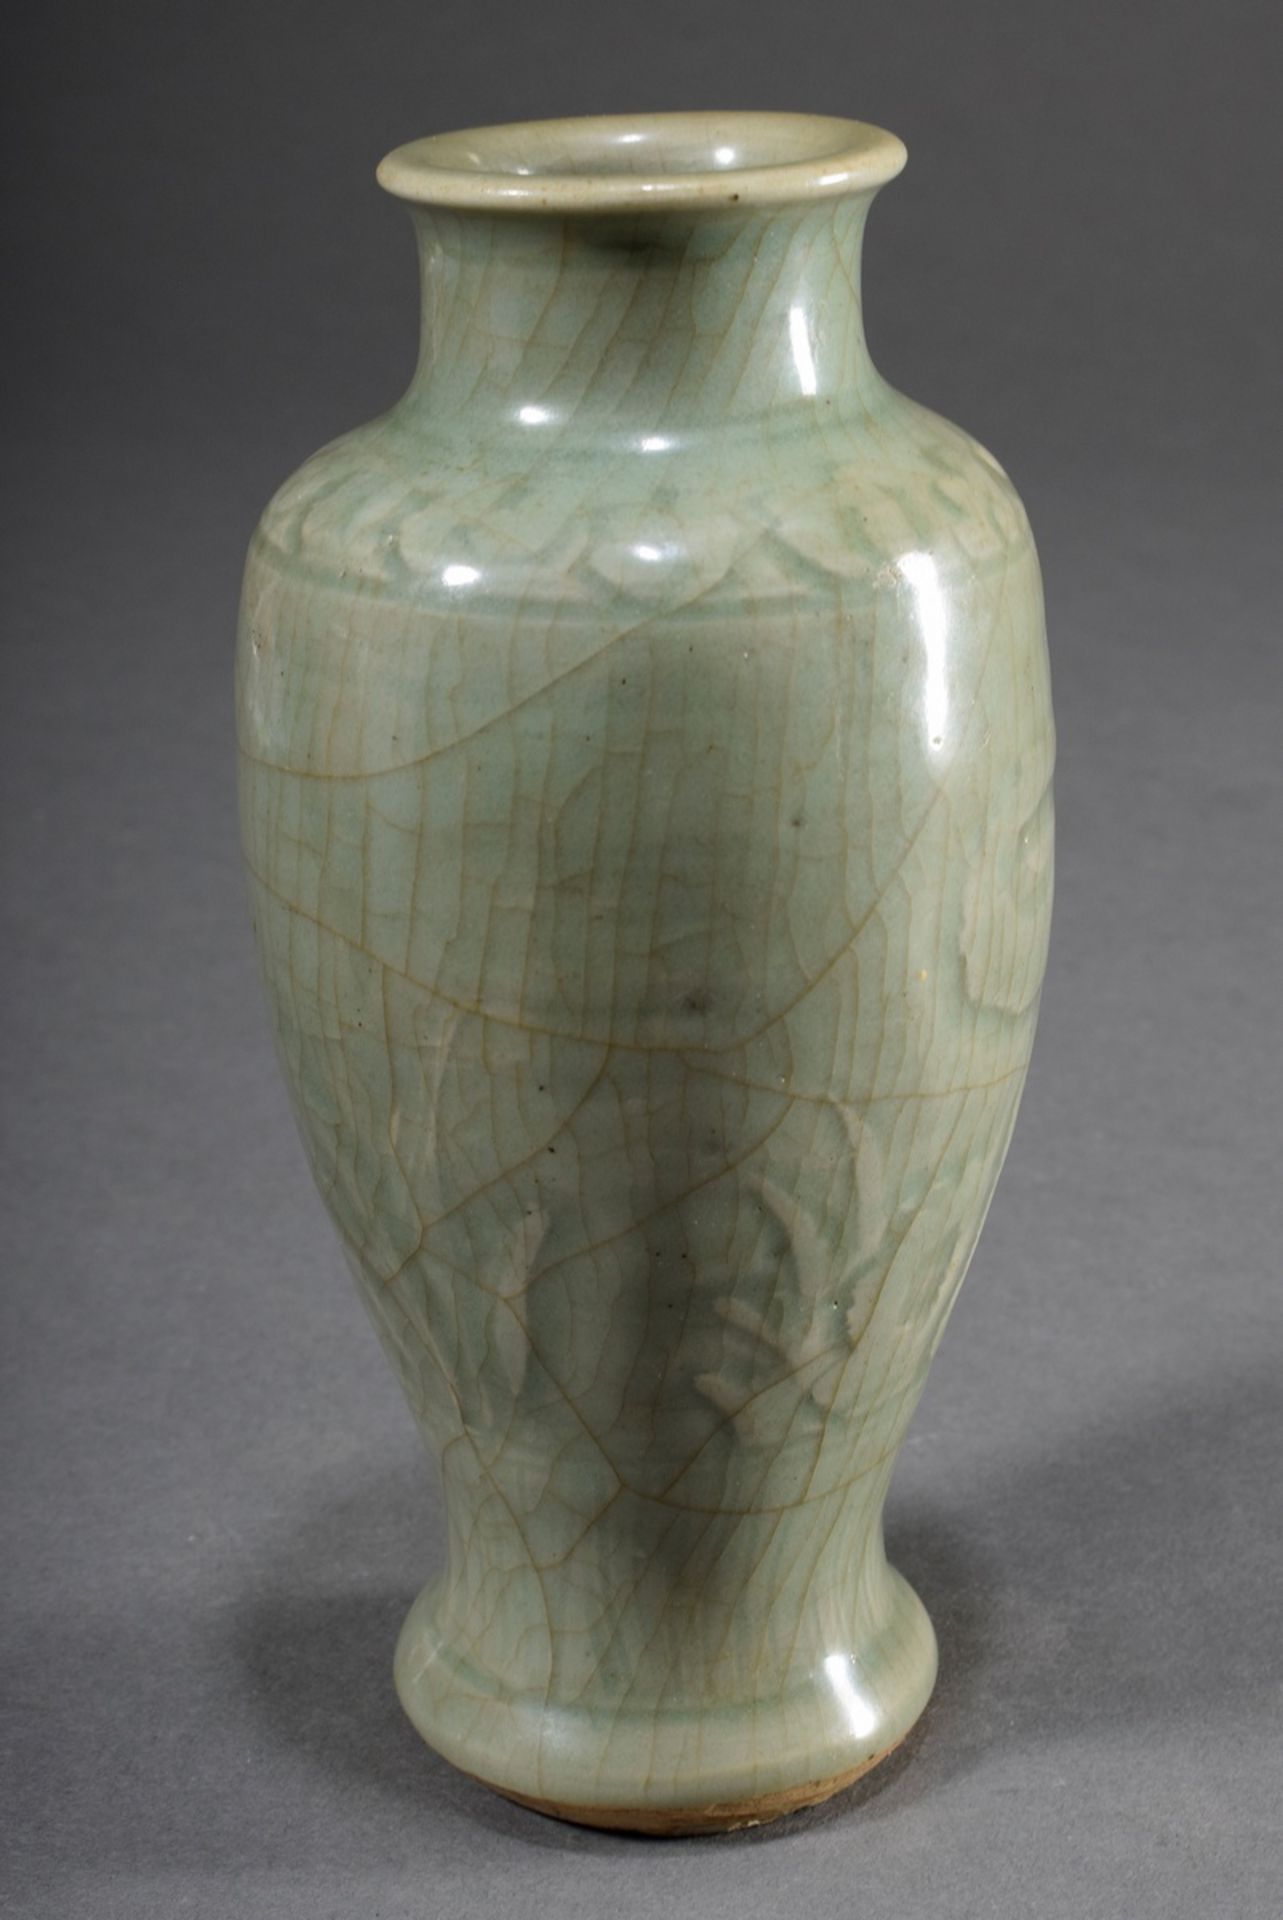 Small Longquan vase with incised decoration and celadon glaze and craquelée, Ming Dynasty, 16th cen - Image 2 of 4